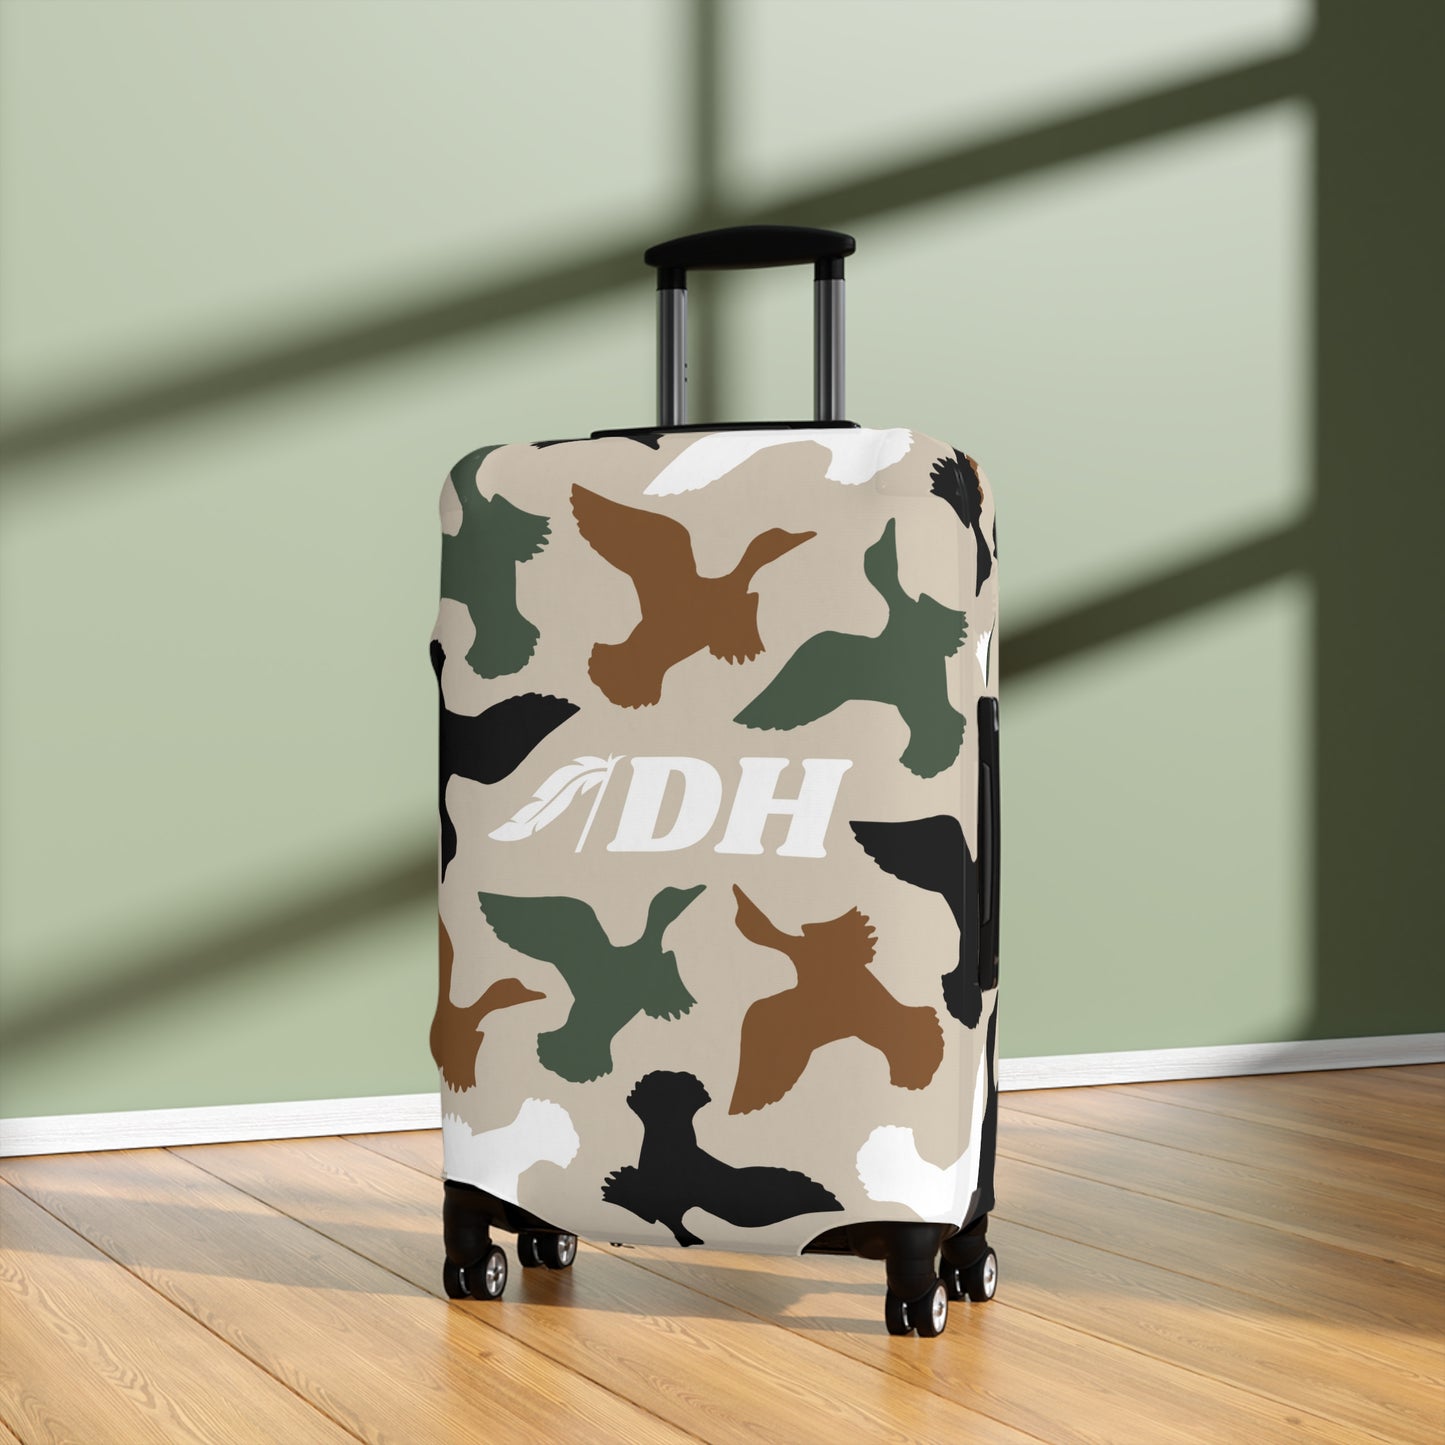 DH FLIGHT Luggage *COVER ONLY* in Marsh